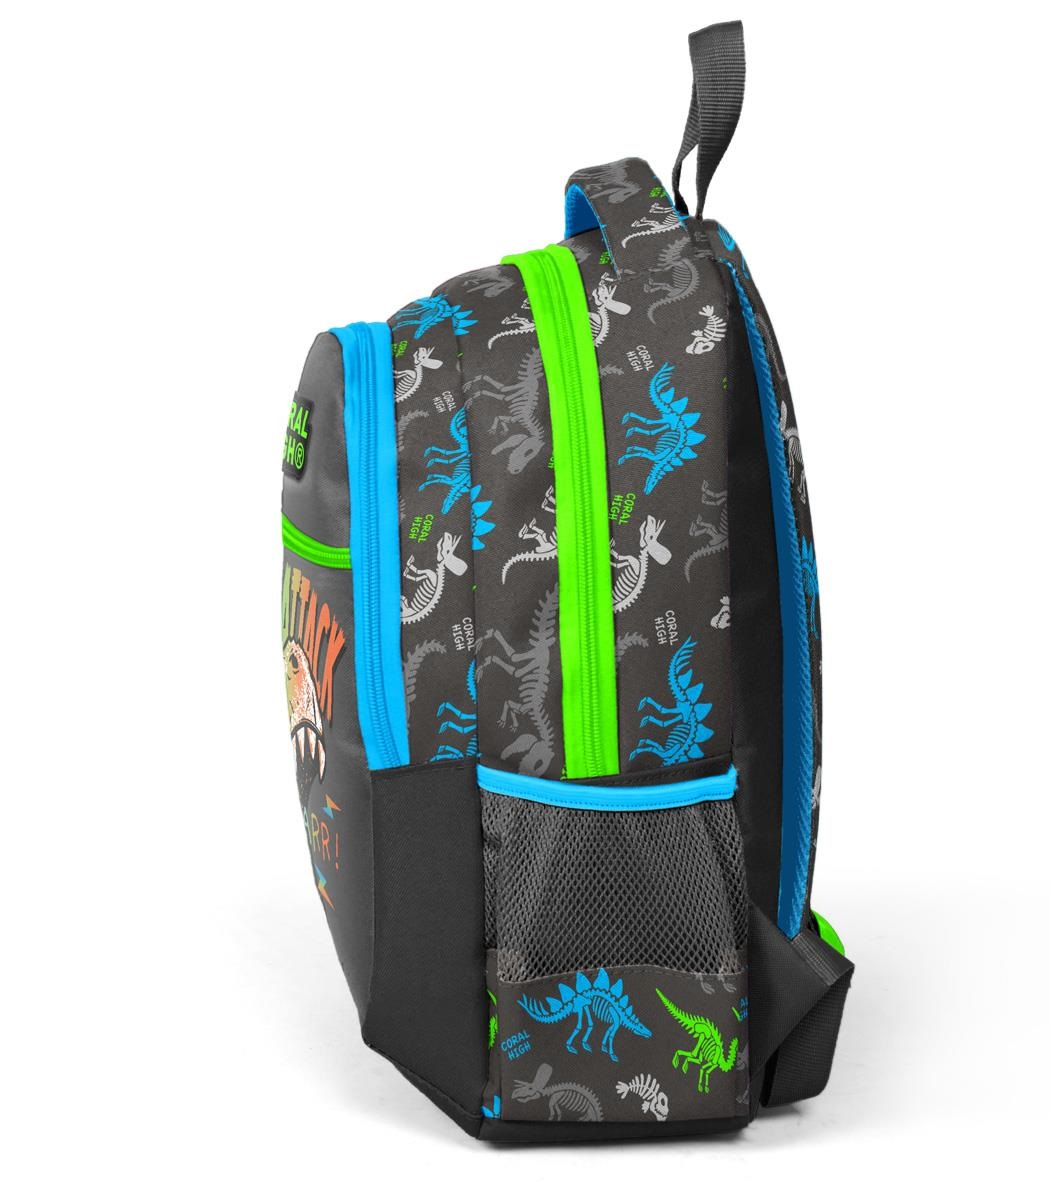 Coral High Kids Three Compartment School Backpack - Gray Dinosaur Patterned